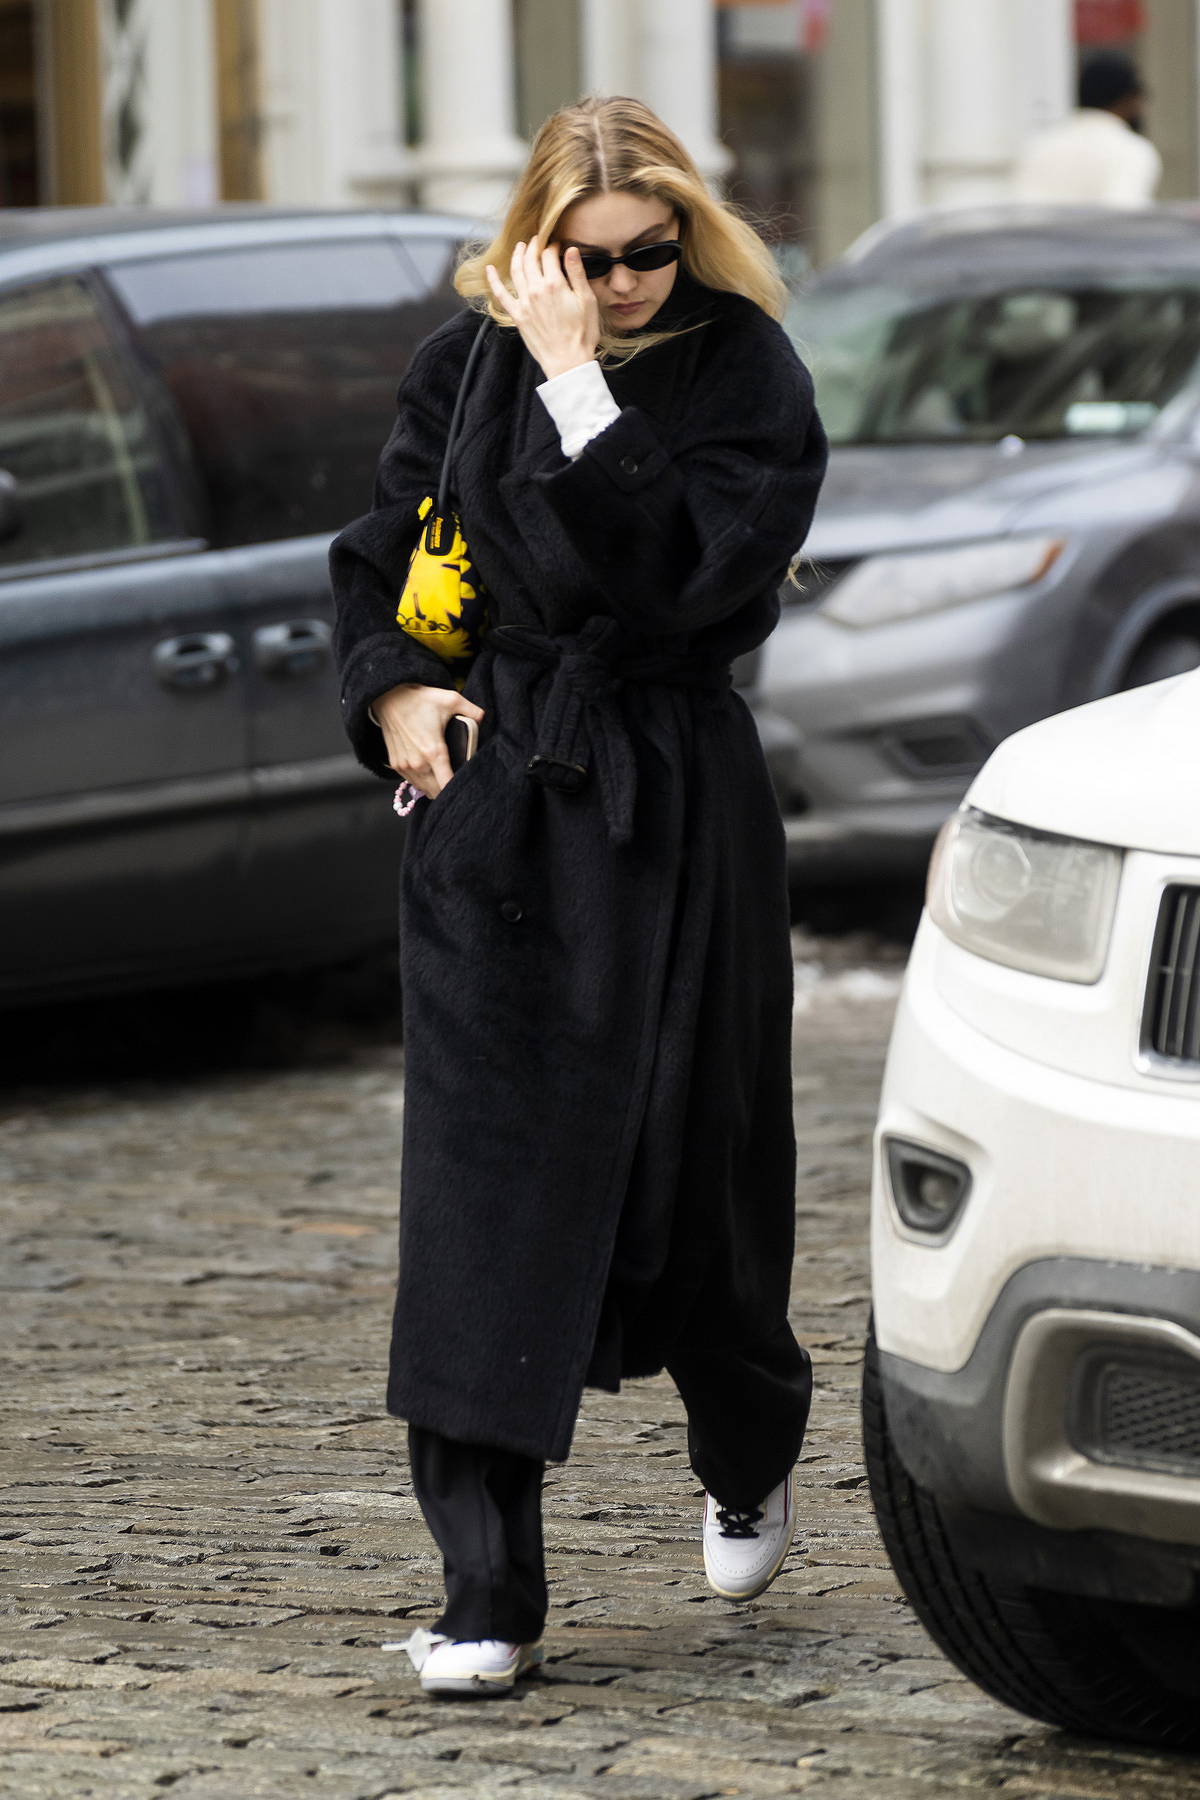 https://www.celebsfirst.com/wp-content/uploads/2022/02/gigi-hadid-bundles-up-in-a-black-winter-coat-as-she-steps-out-in-new-york-city-020222_2.jpg